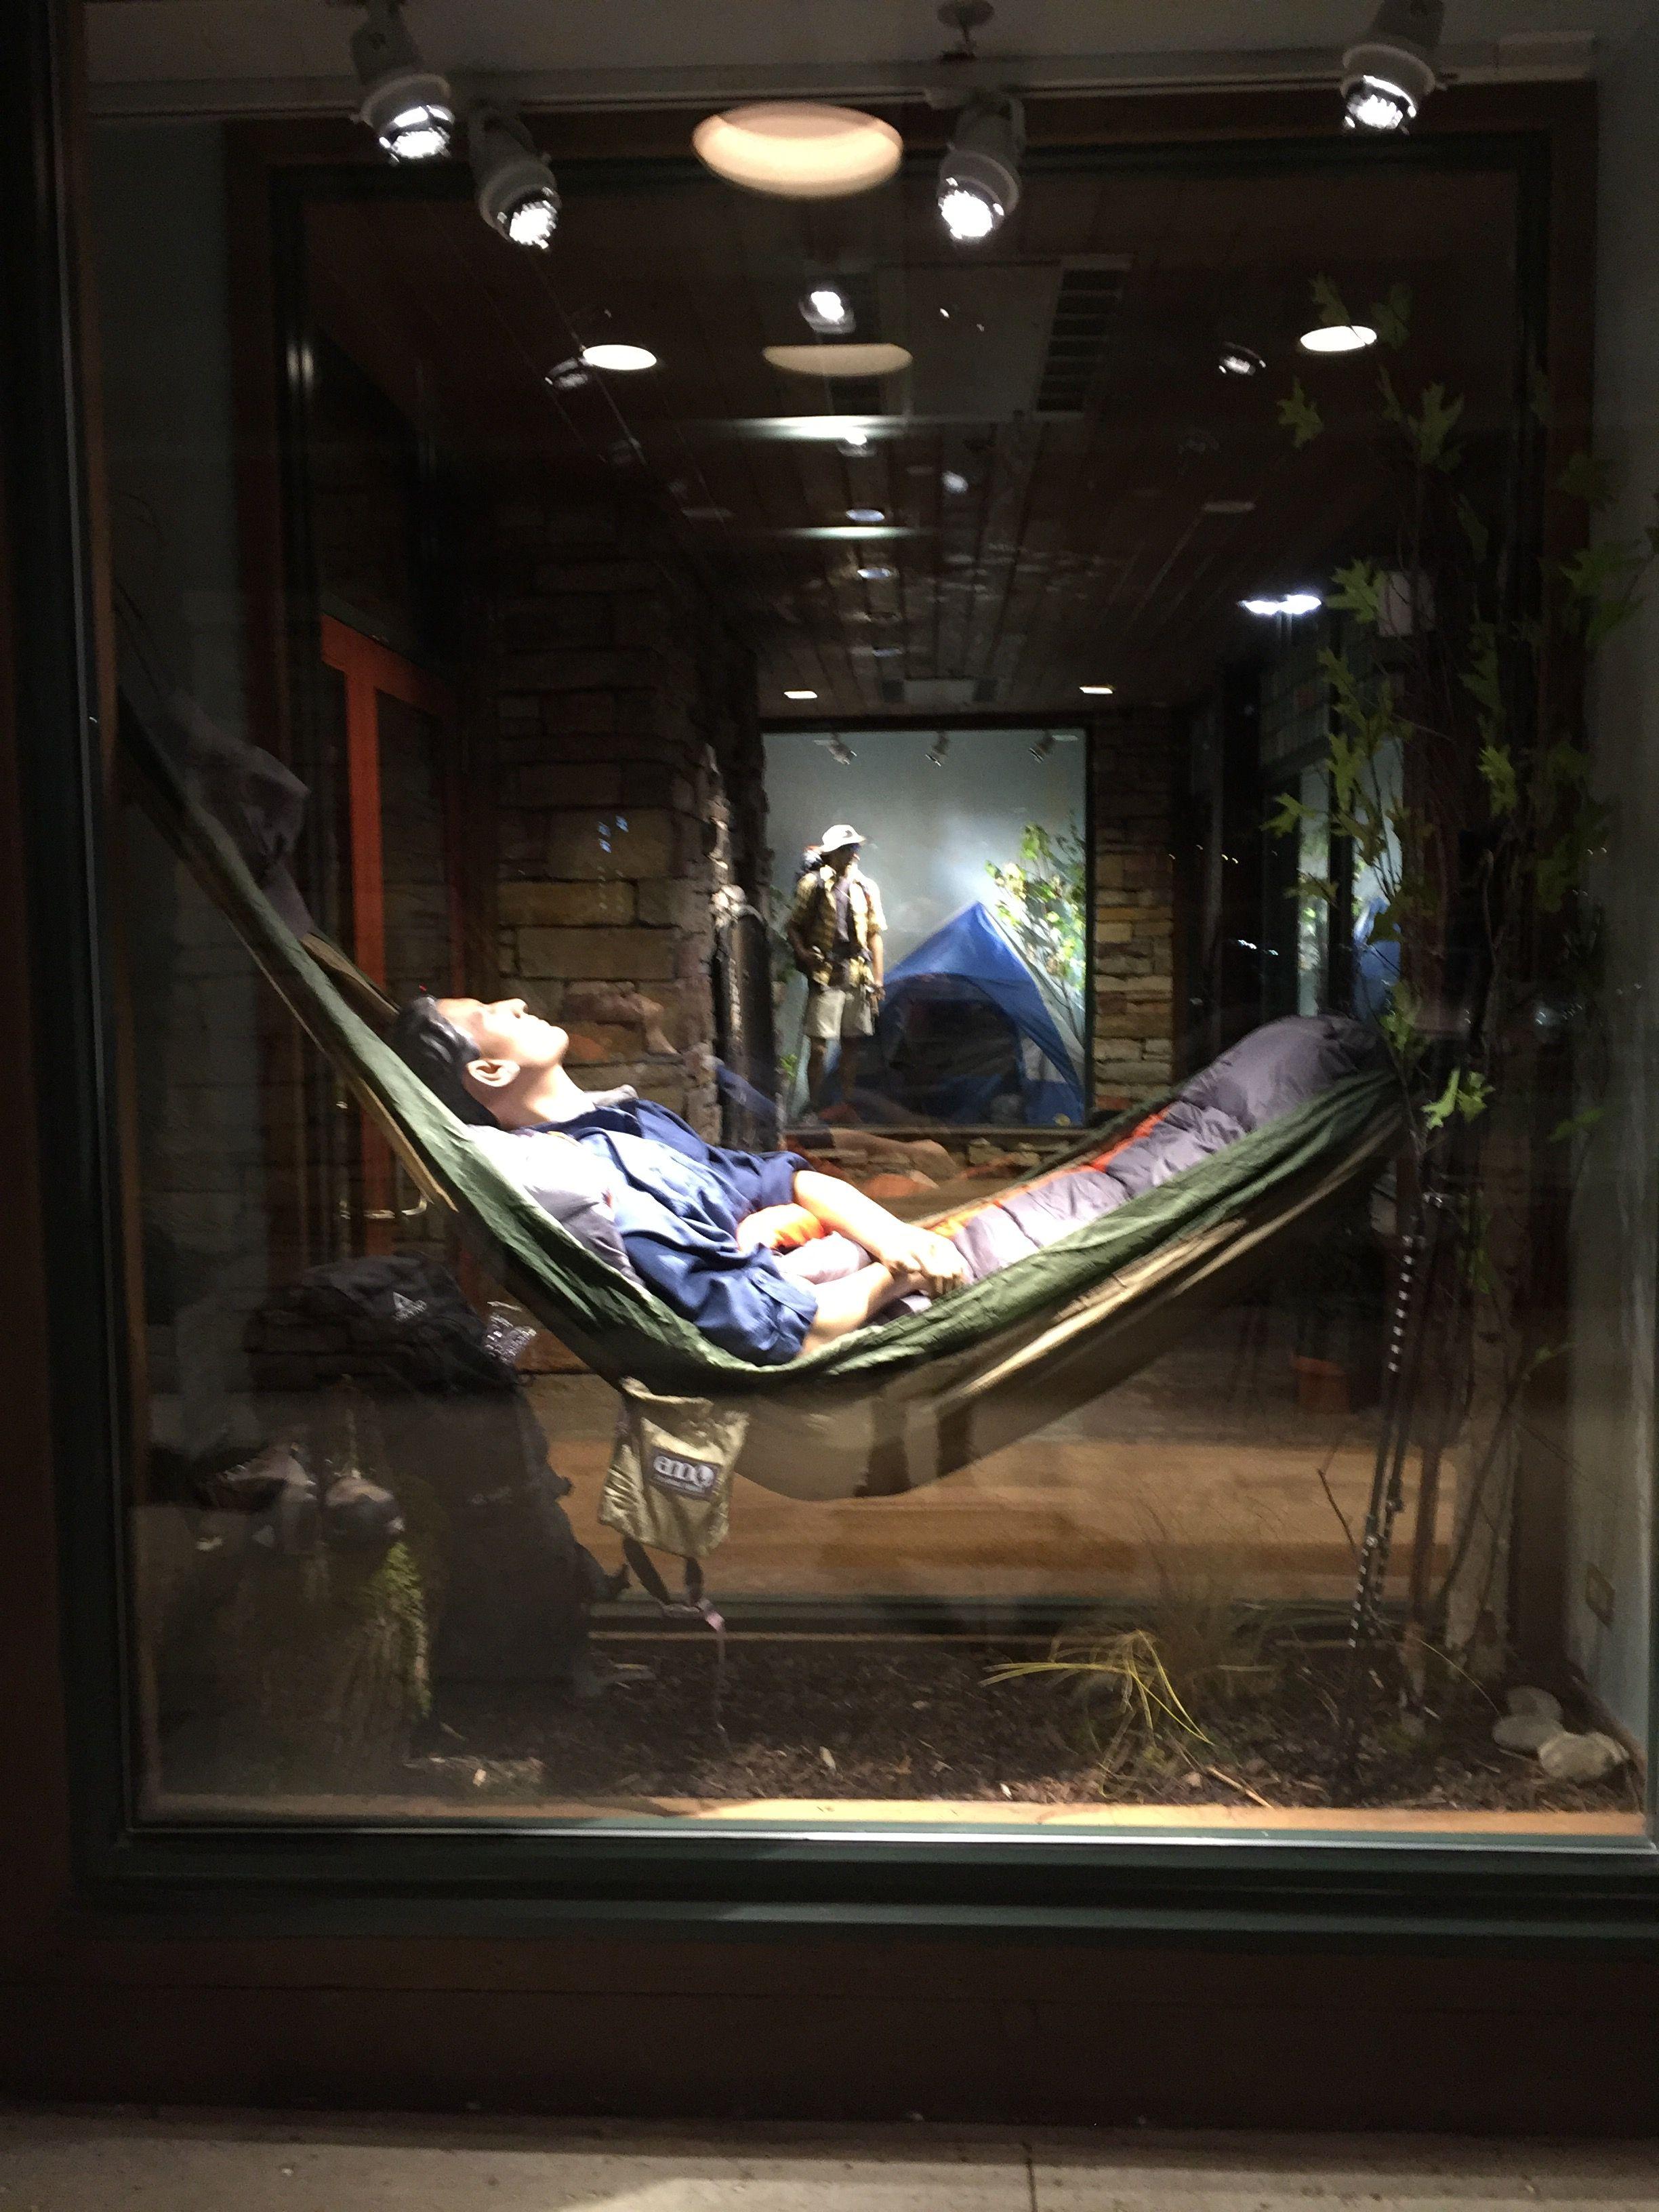 This is a display window at Bass Pro Shops Gurnee. The Theme is